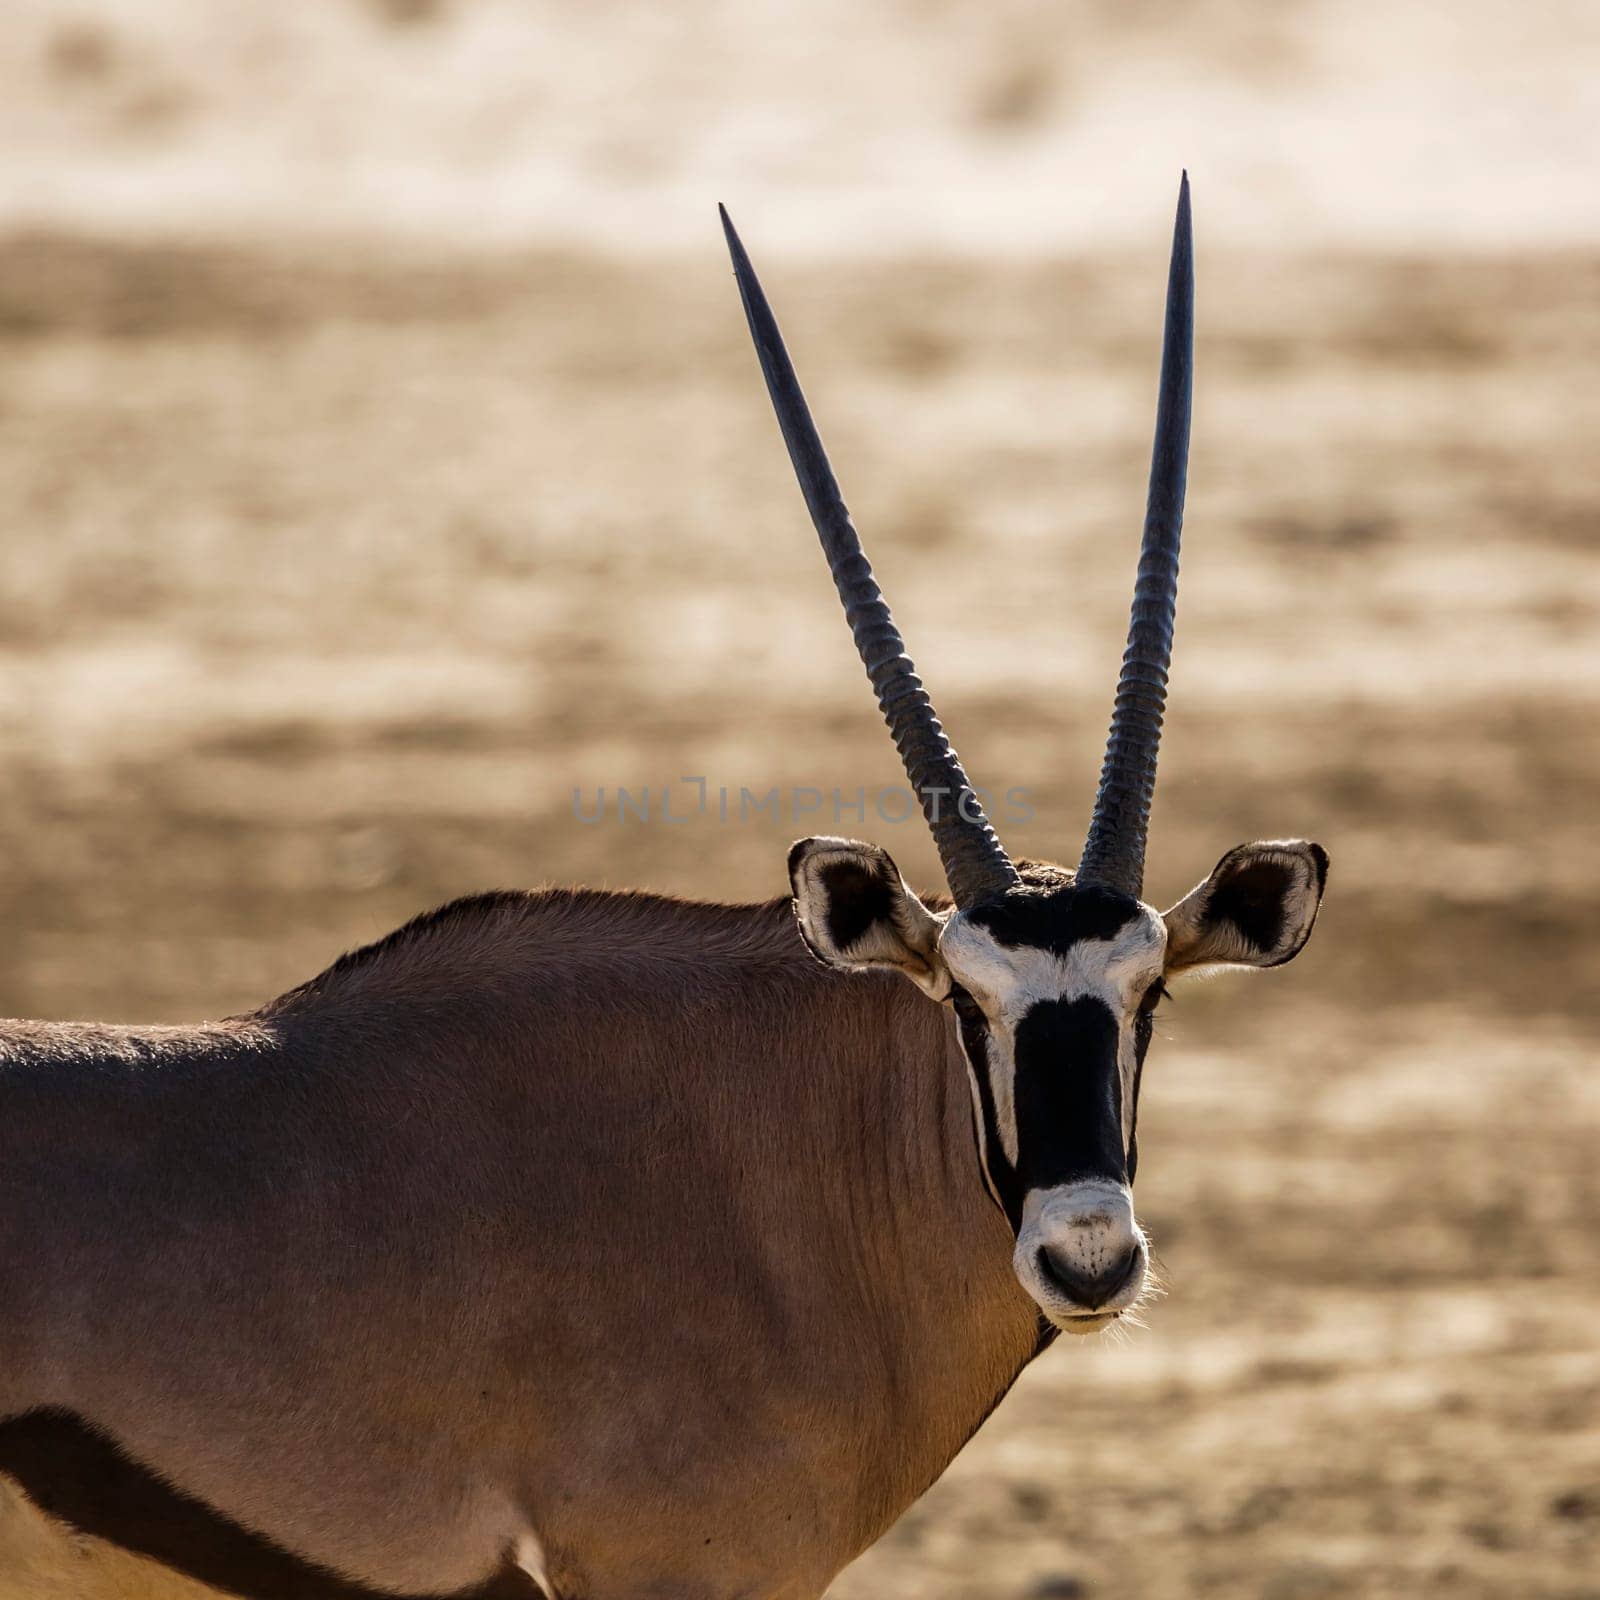 South African Oryx portrait in Kgalagadi transfrontier park, South Africa; specie Oryx gazella family of Bovidae